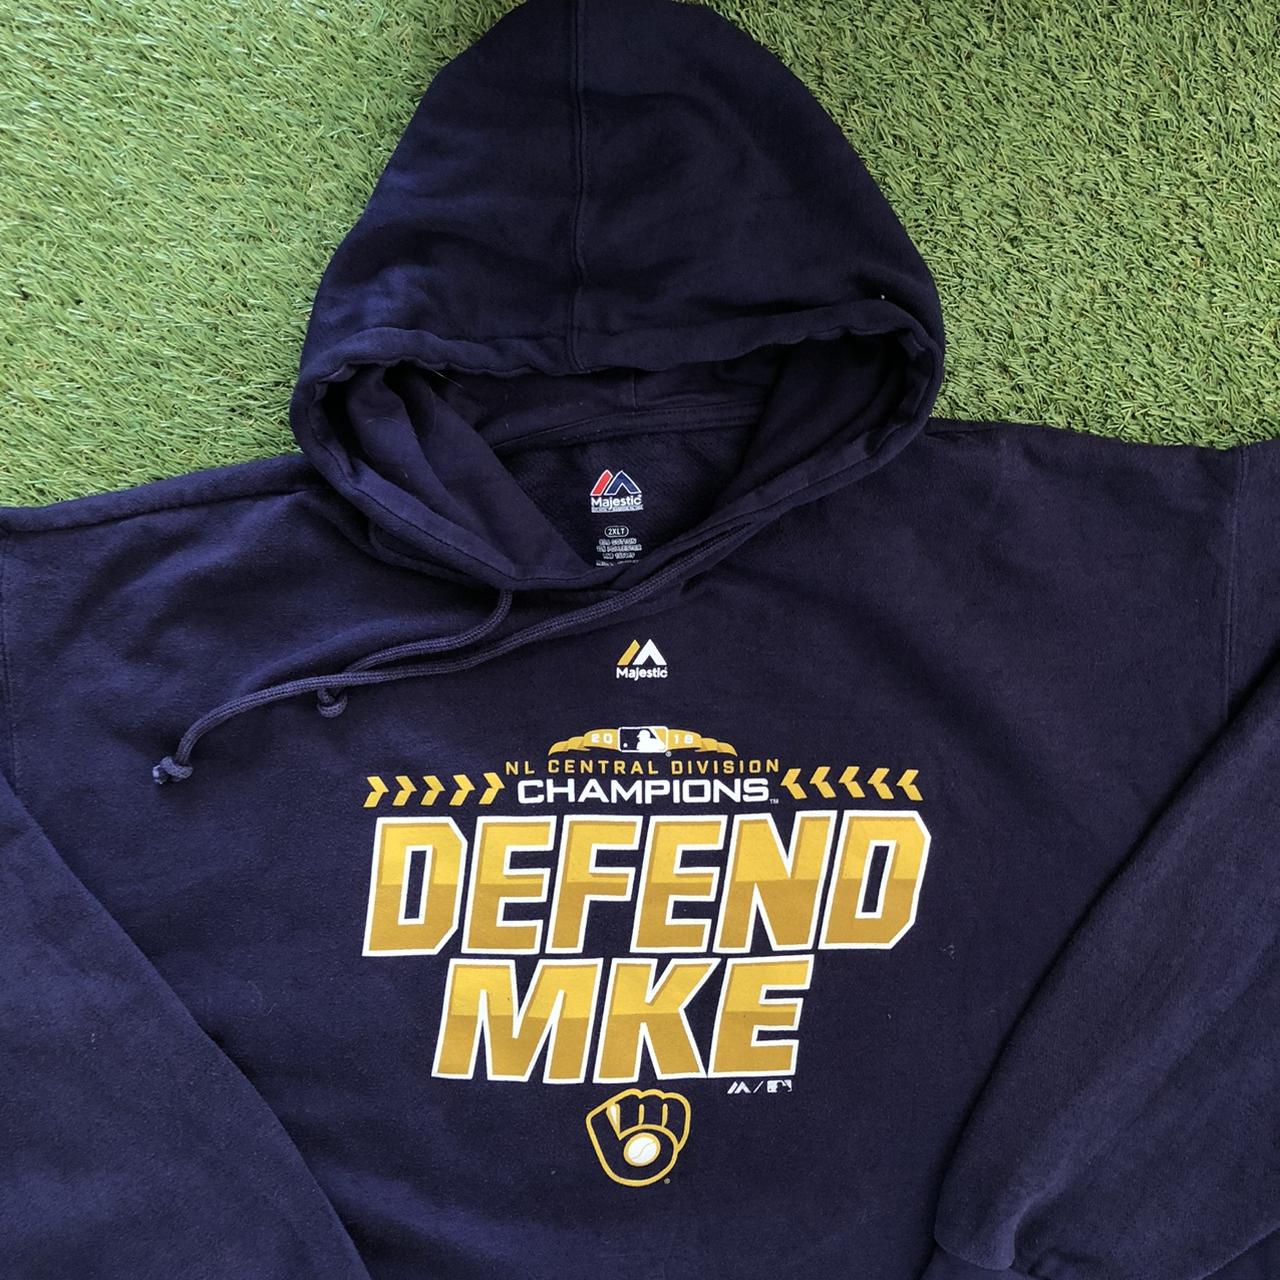 2018 Milwaukee Brewers MAJESTIC “Defend MKE” Central Champs Navy Hoodie SZ L